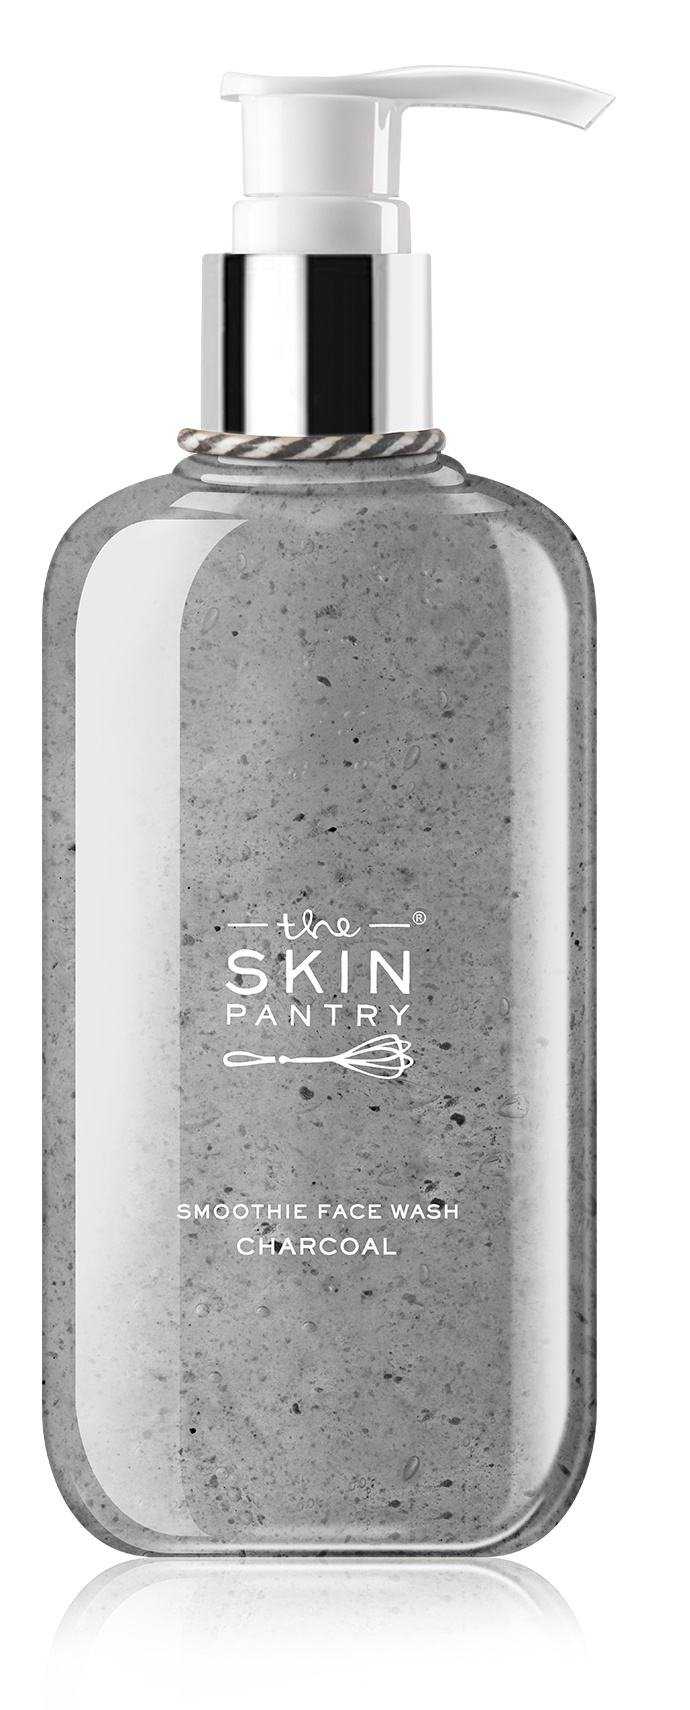 The Skin Pantry Facewash Smoothie Charcoal